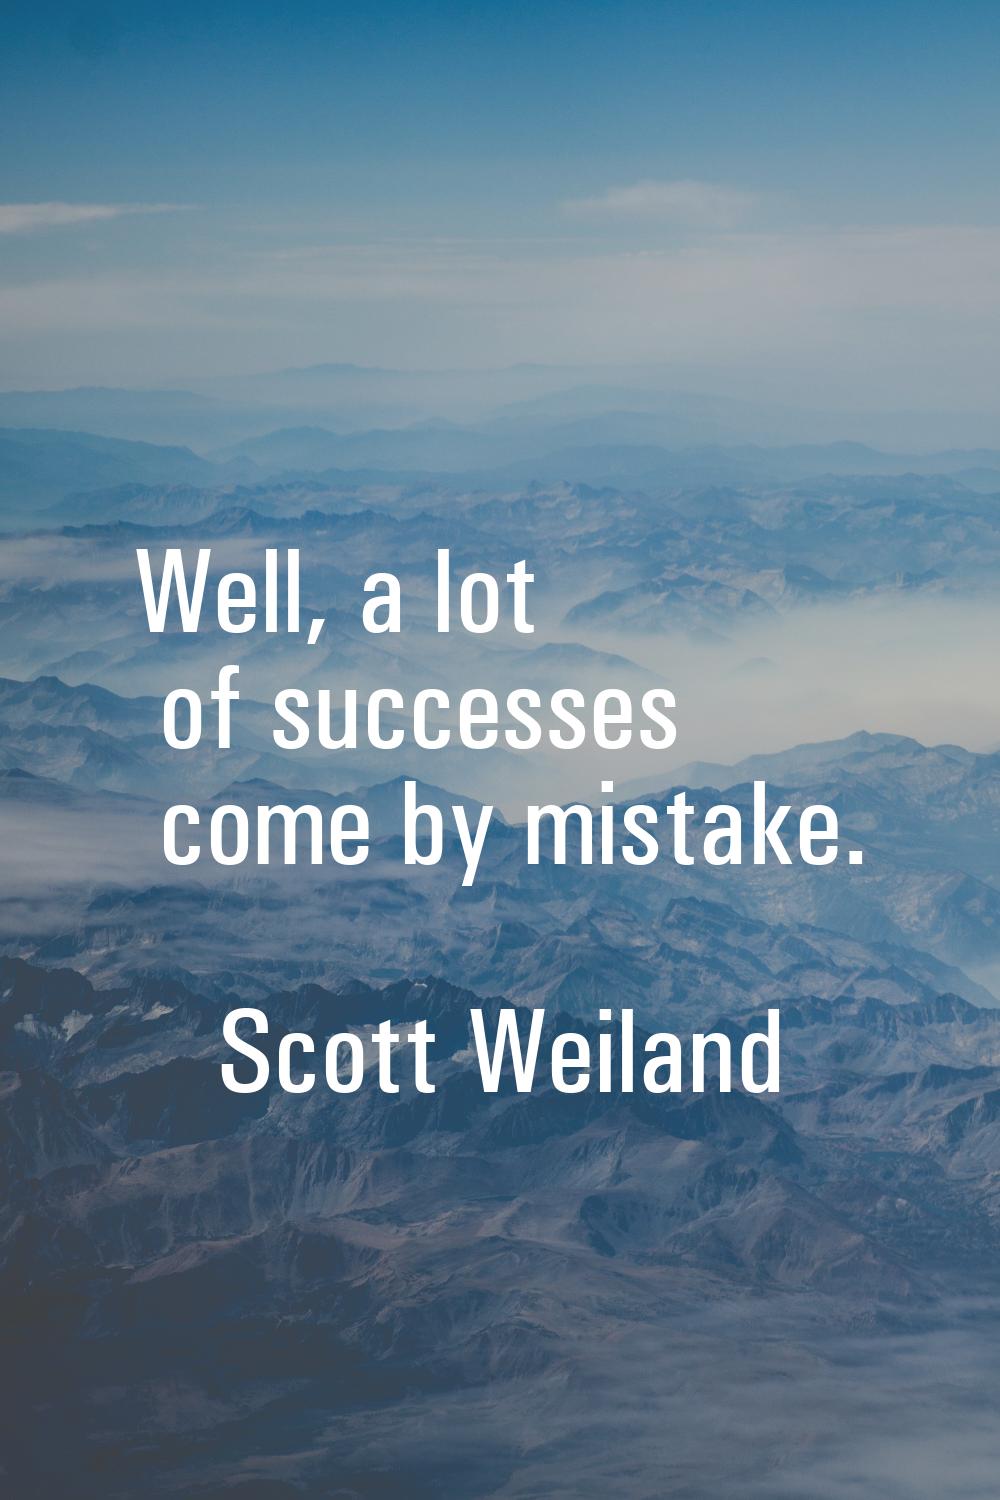 Well, a lot of successes come by mistake.